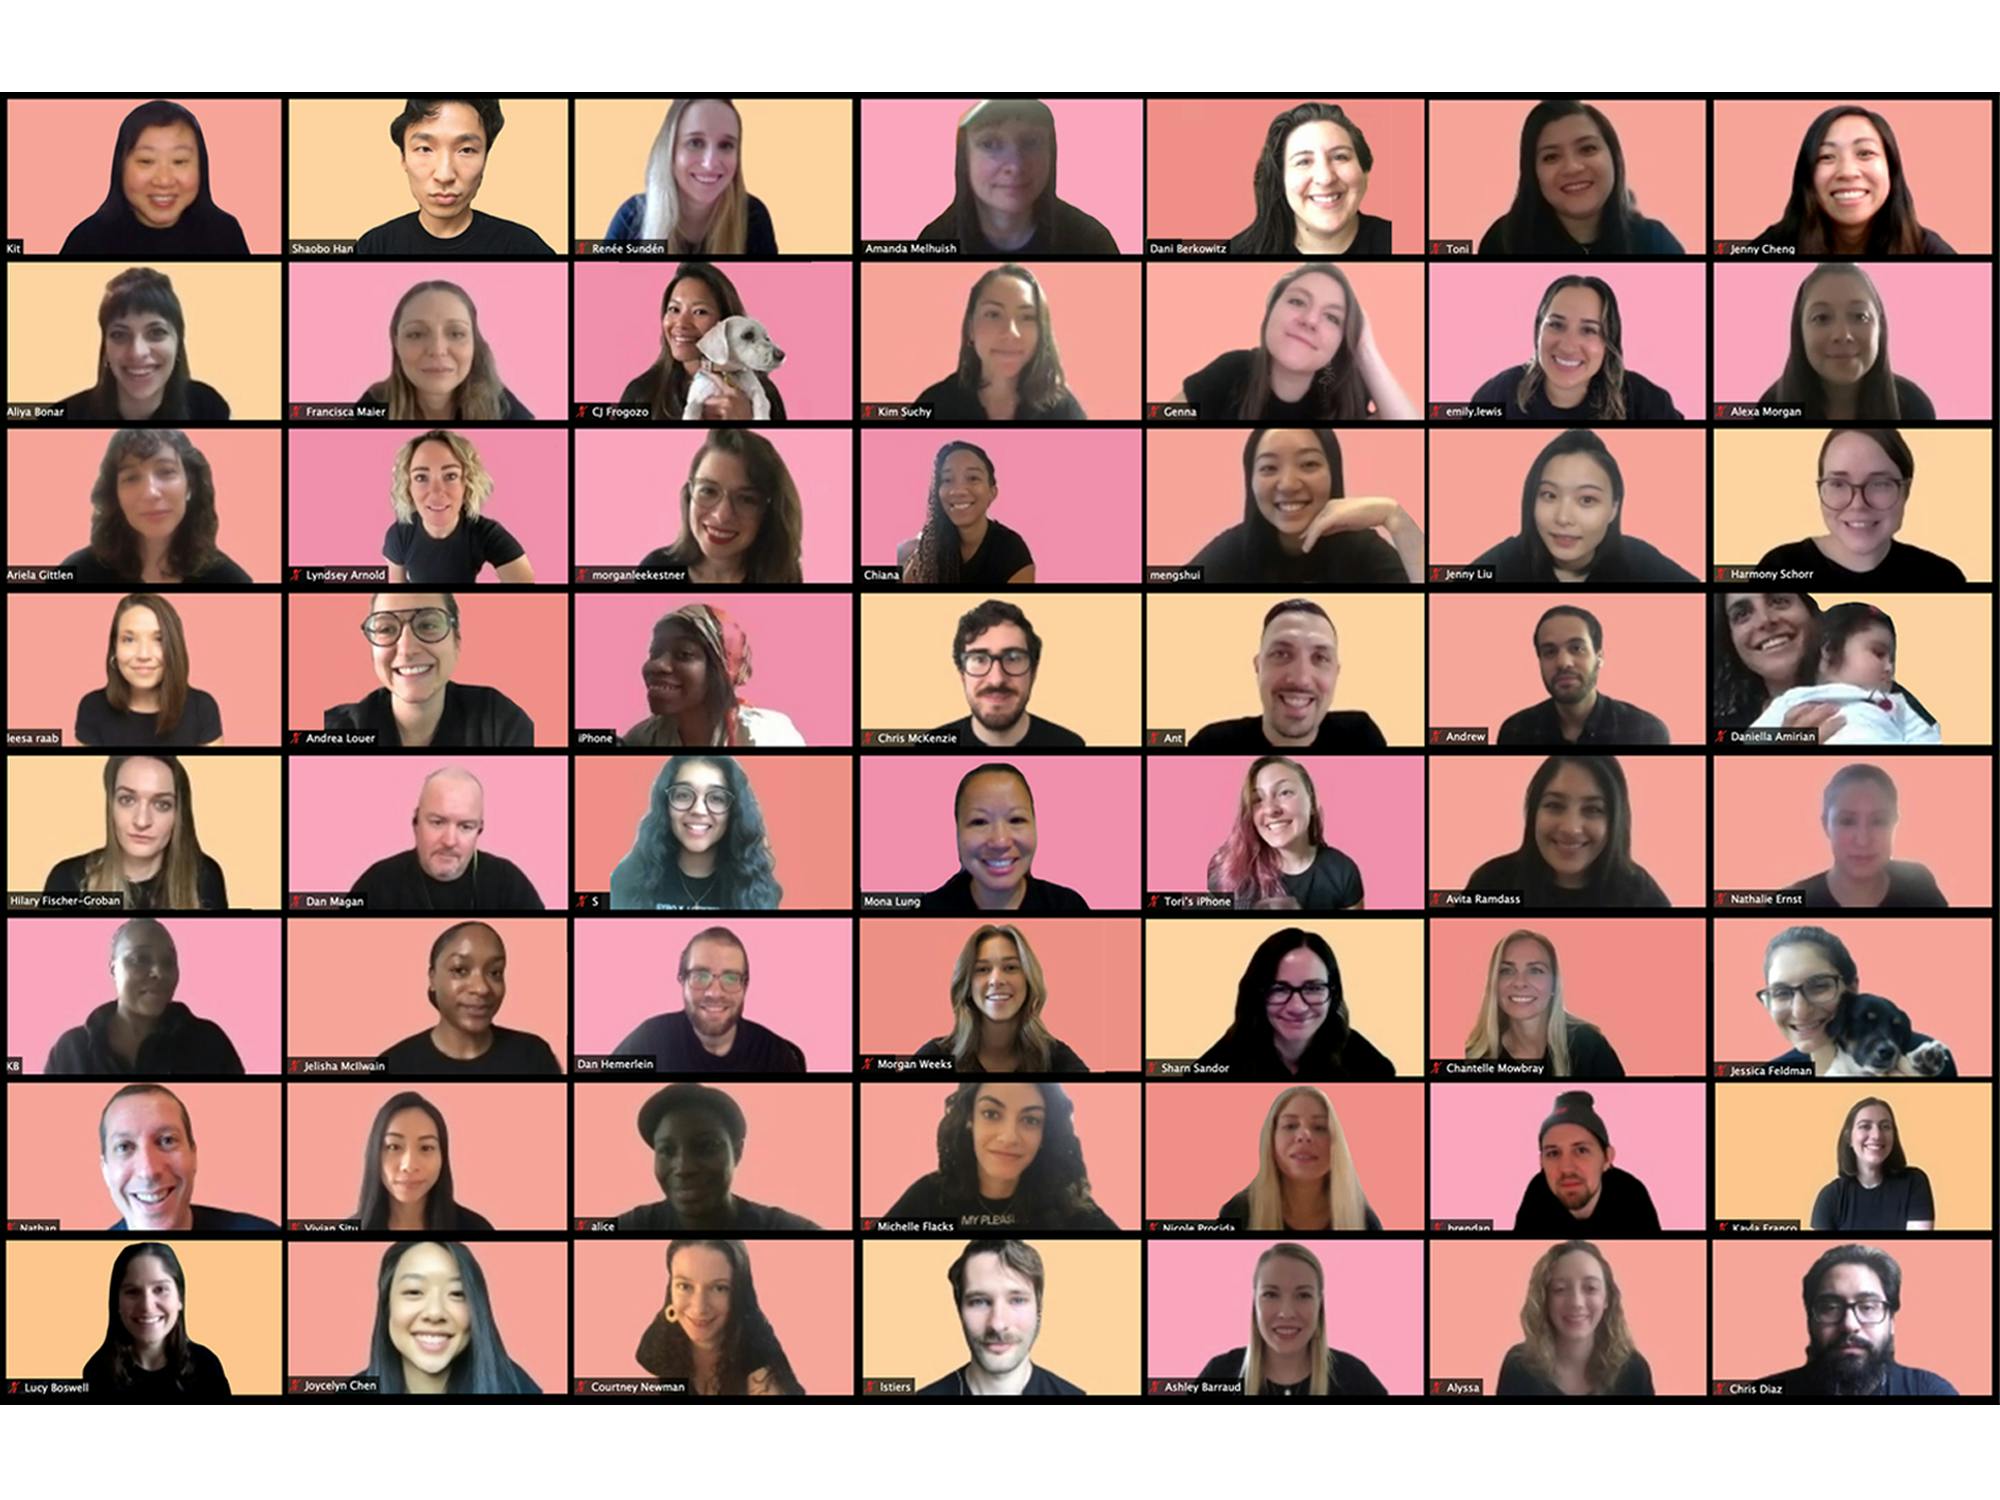 grid of Thinx employee faces smiling